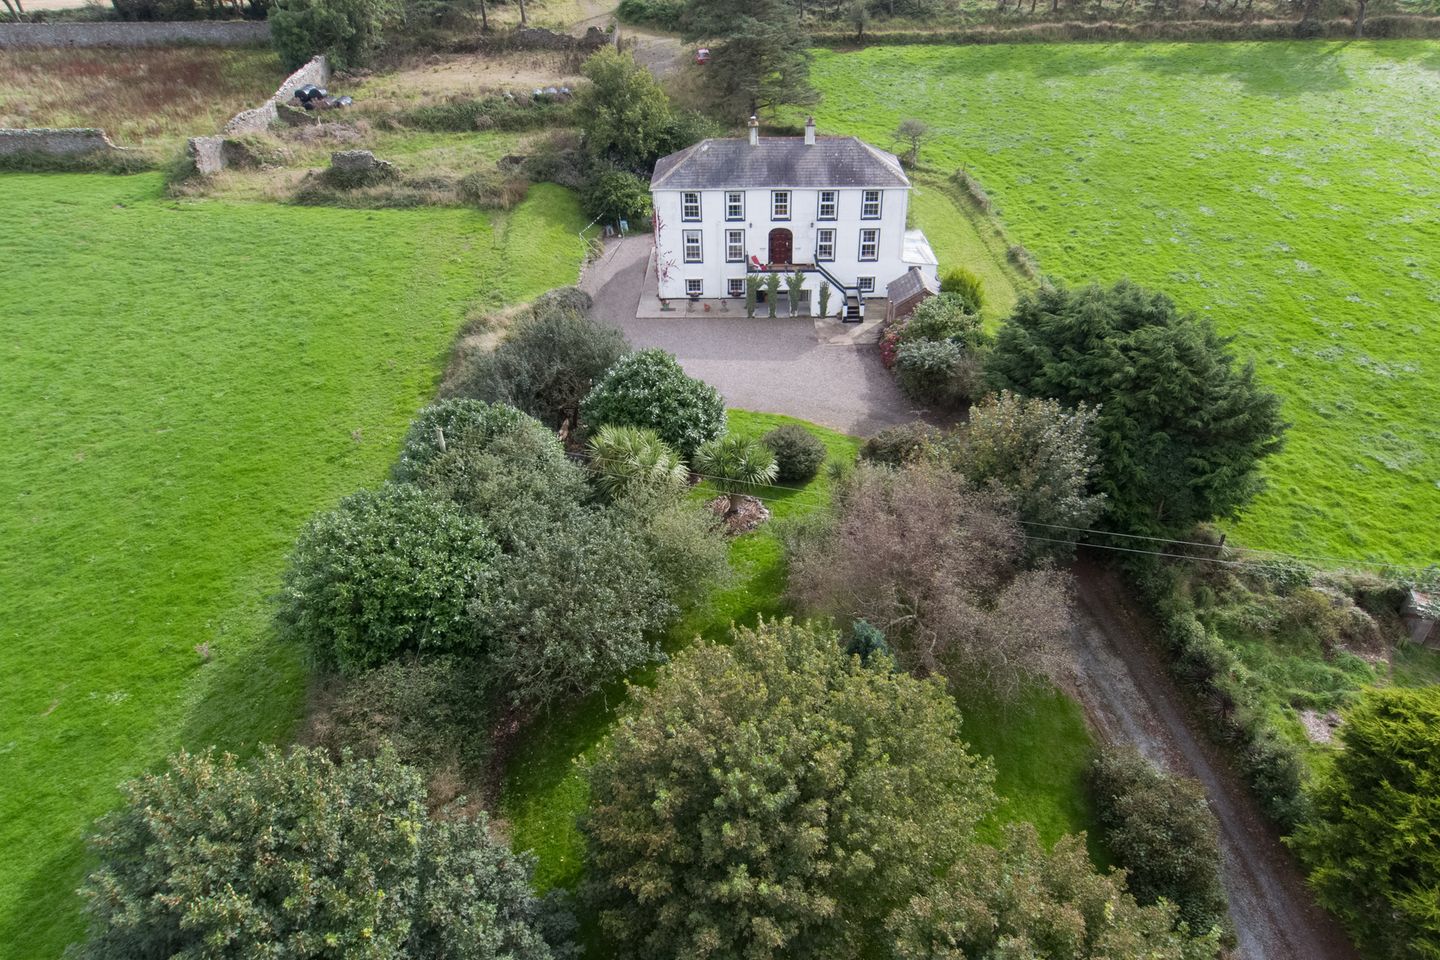 Old Nohoval House, Nohoval, Co. Cork